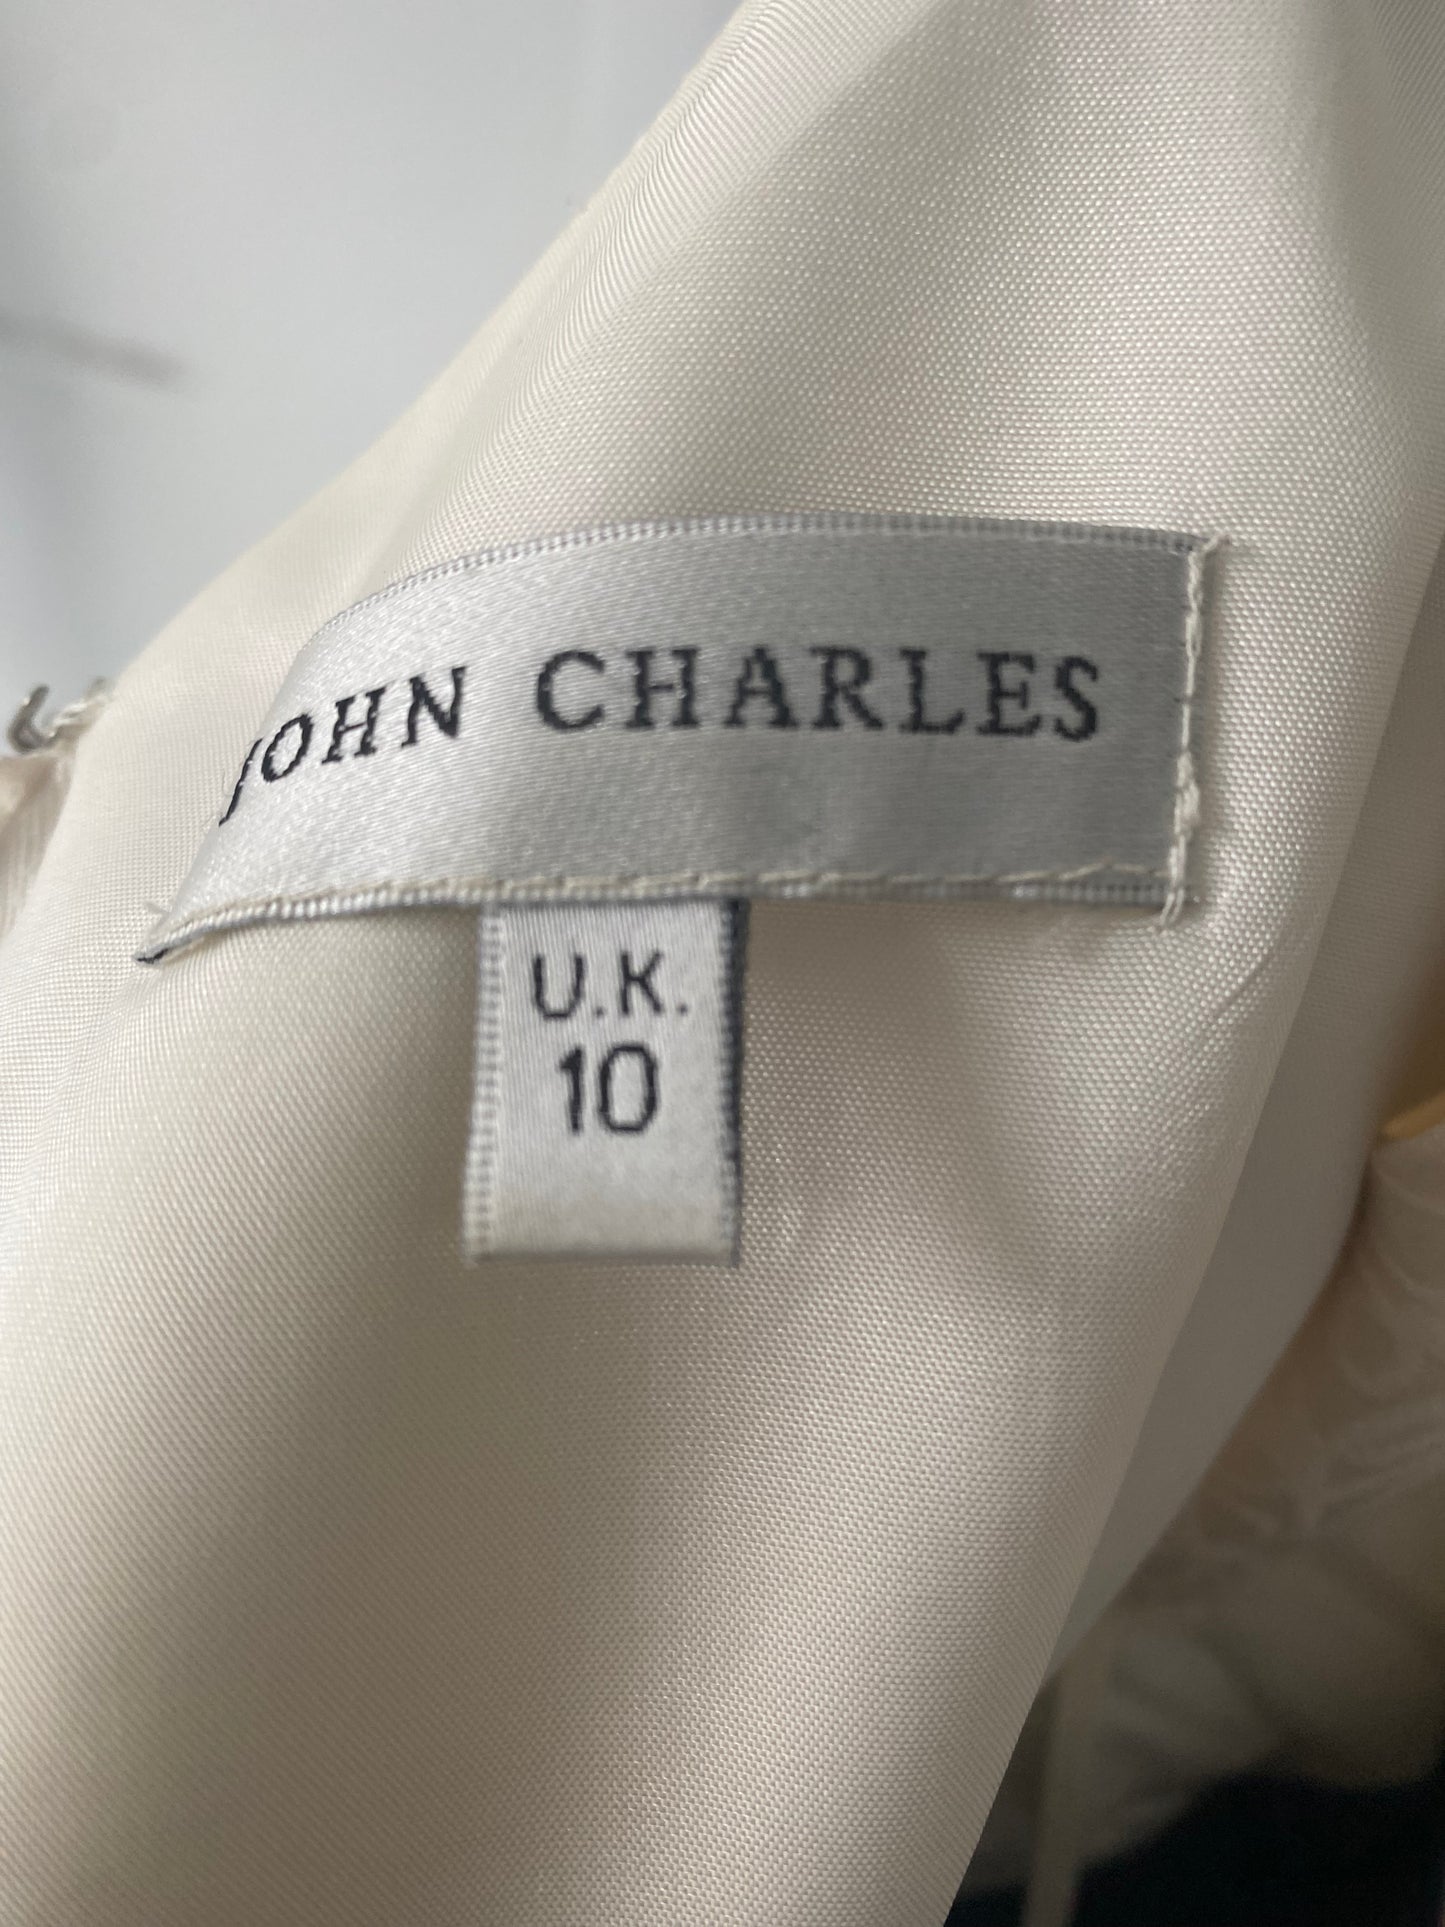 John Charles Dress and Jacket Suit Size 10